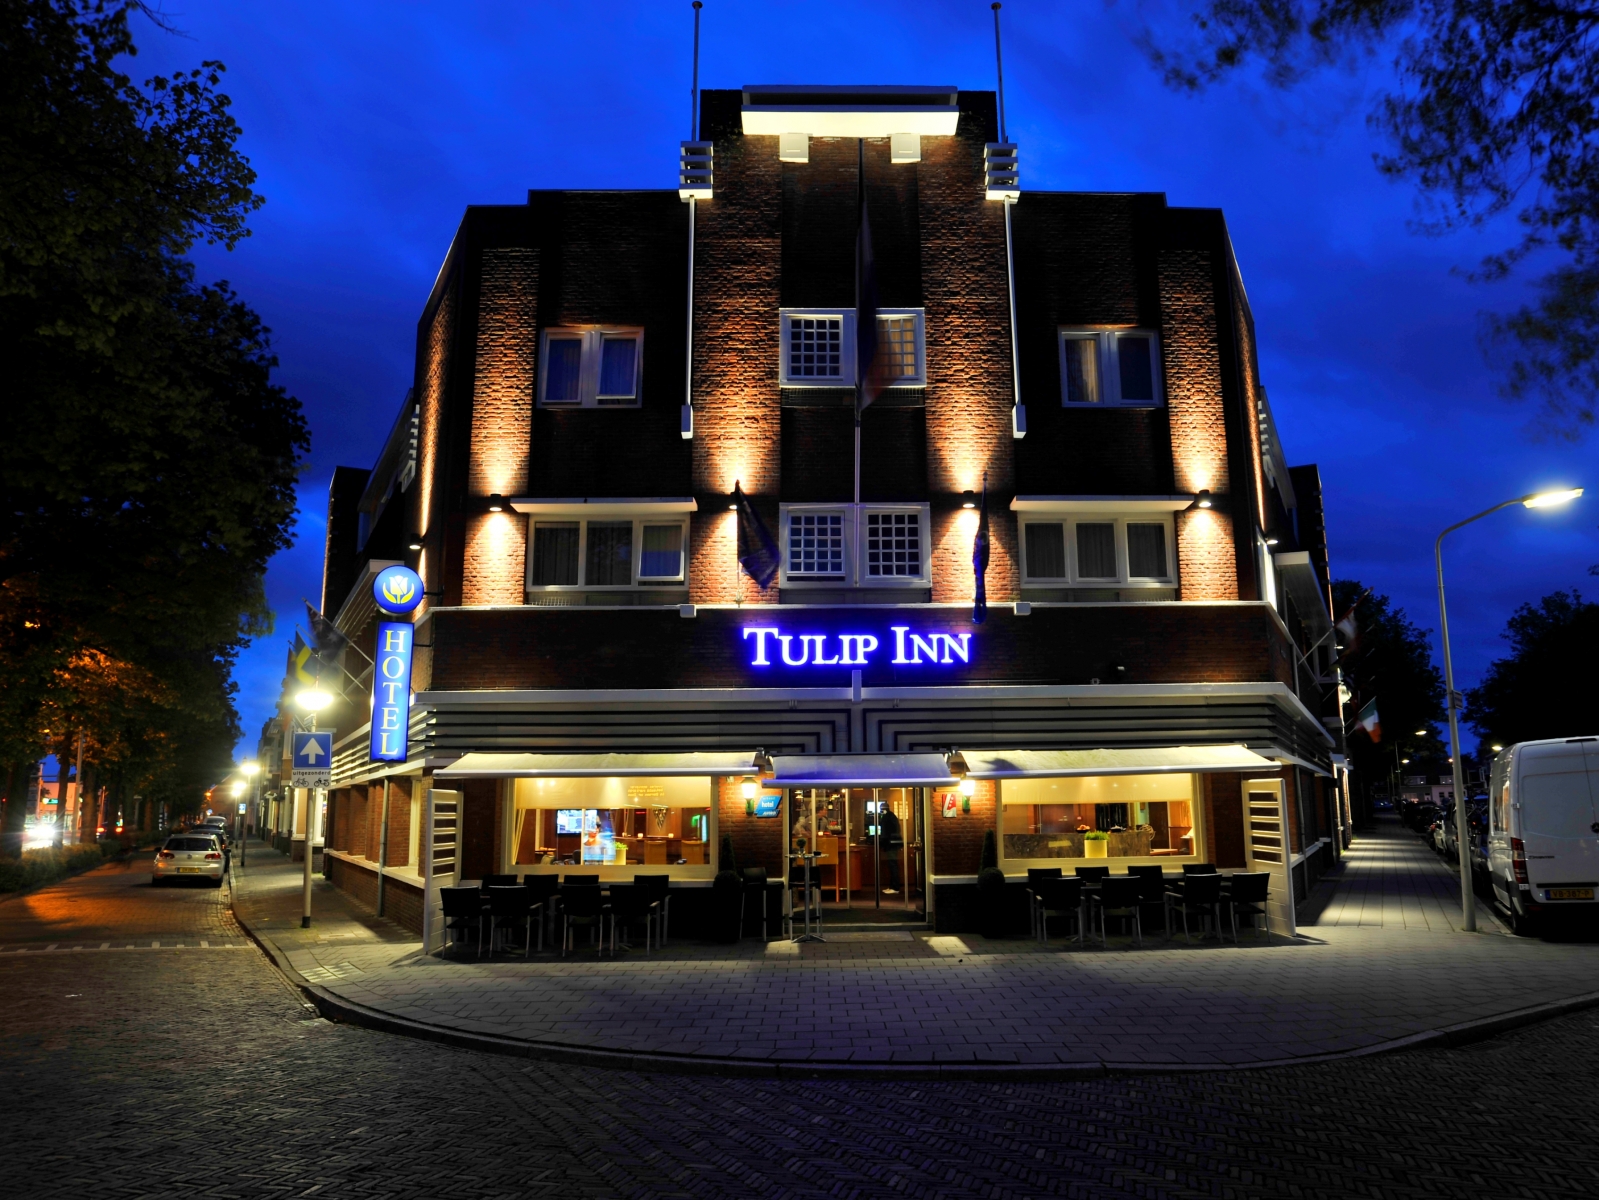 Tulip Inn Bergen Op Zoom <br/>66.60 ew <br/> <a href='http://vakantieoplossing.nl/outpage/?id=2113593aabe84f3756f106c6e6c0faad' target='_blank'>View Details</a>